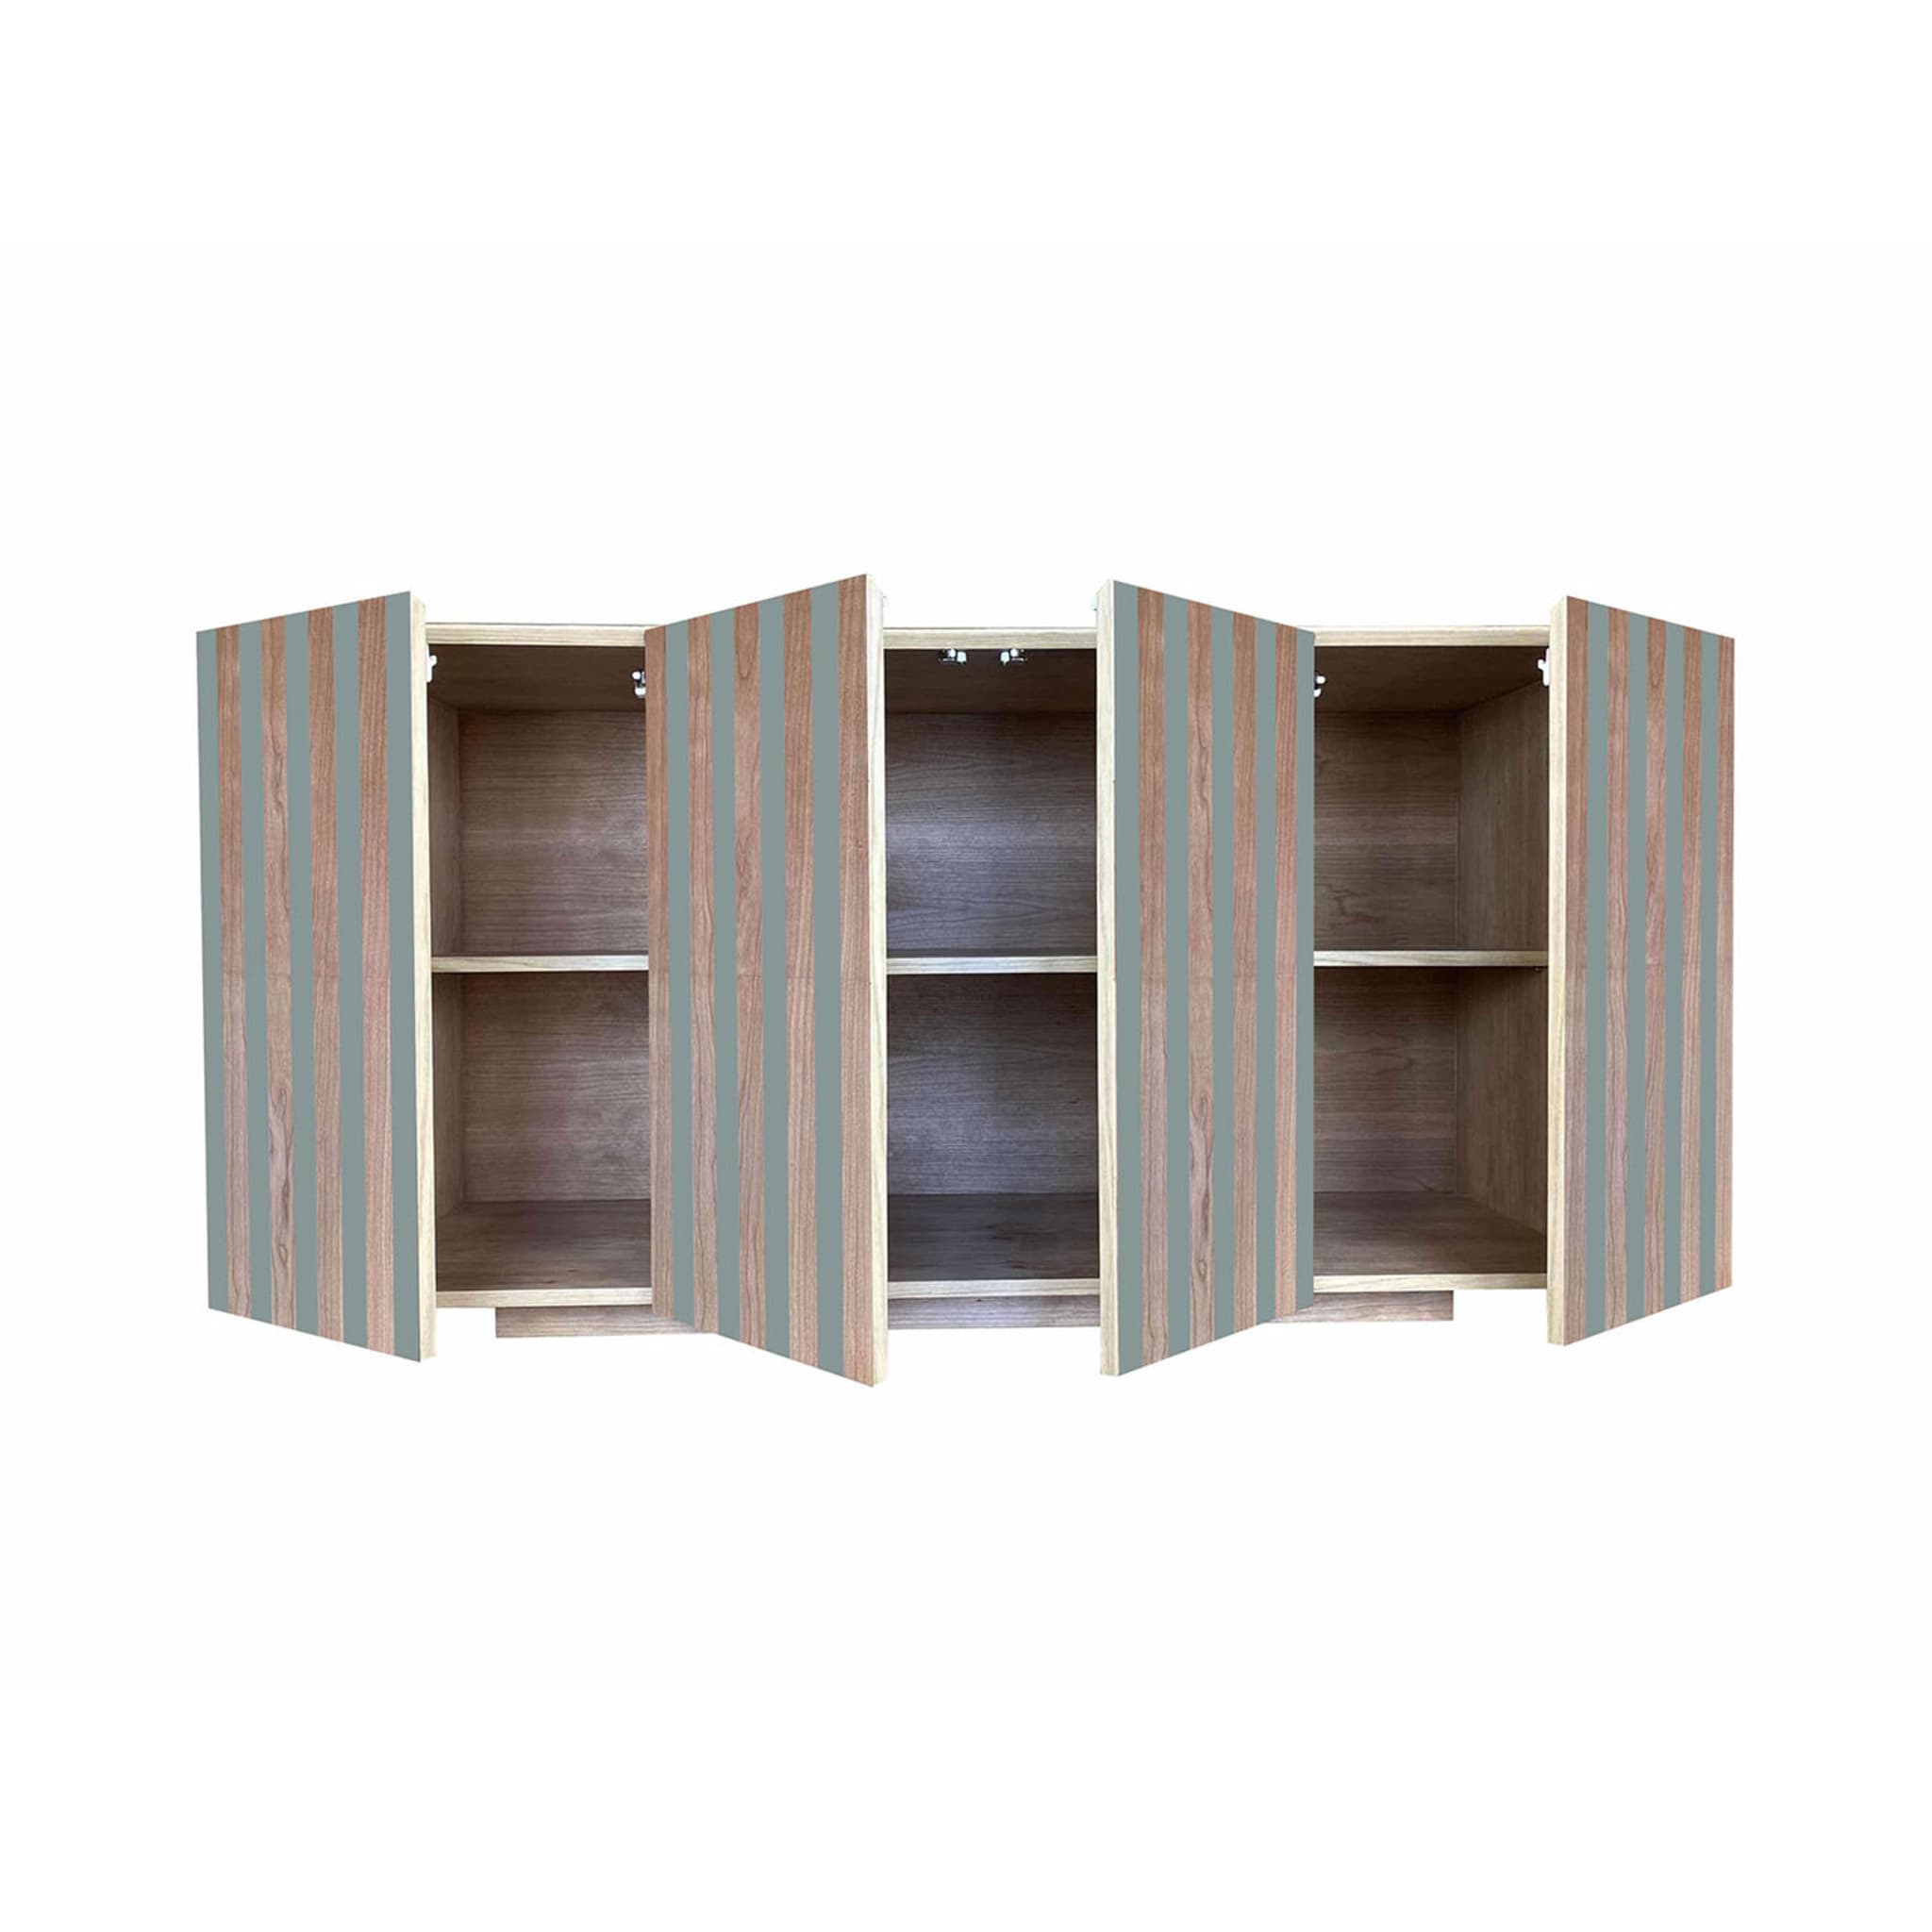 Md3 4-Door Striped Sideboard by Meccani Studio - Alternative view 5